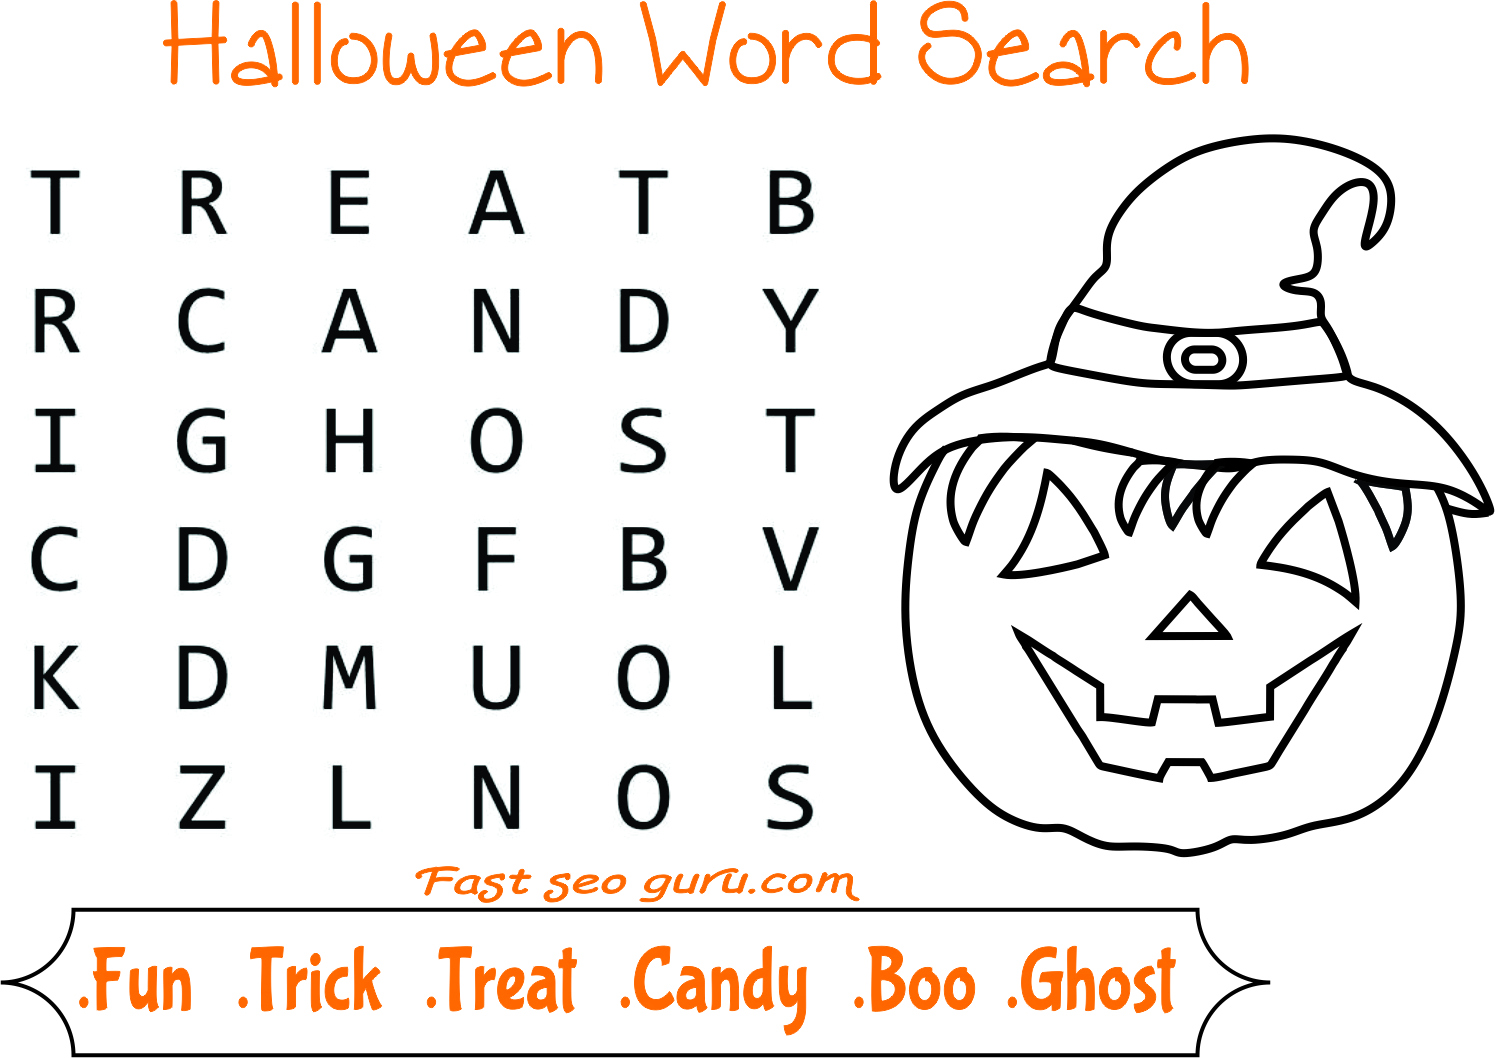 Easy halloween word search for kids